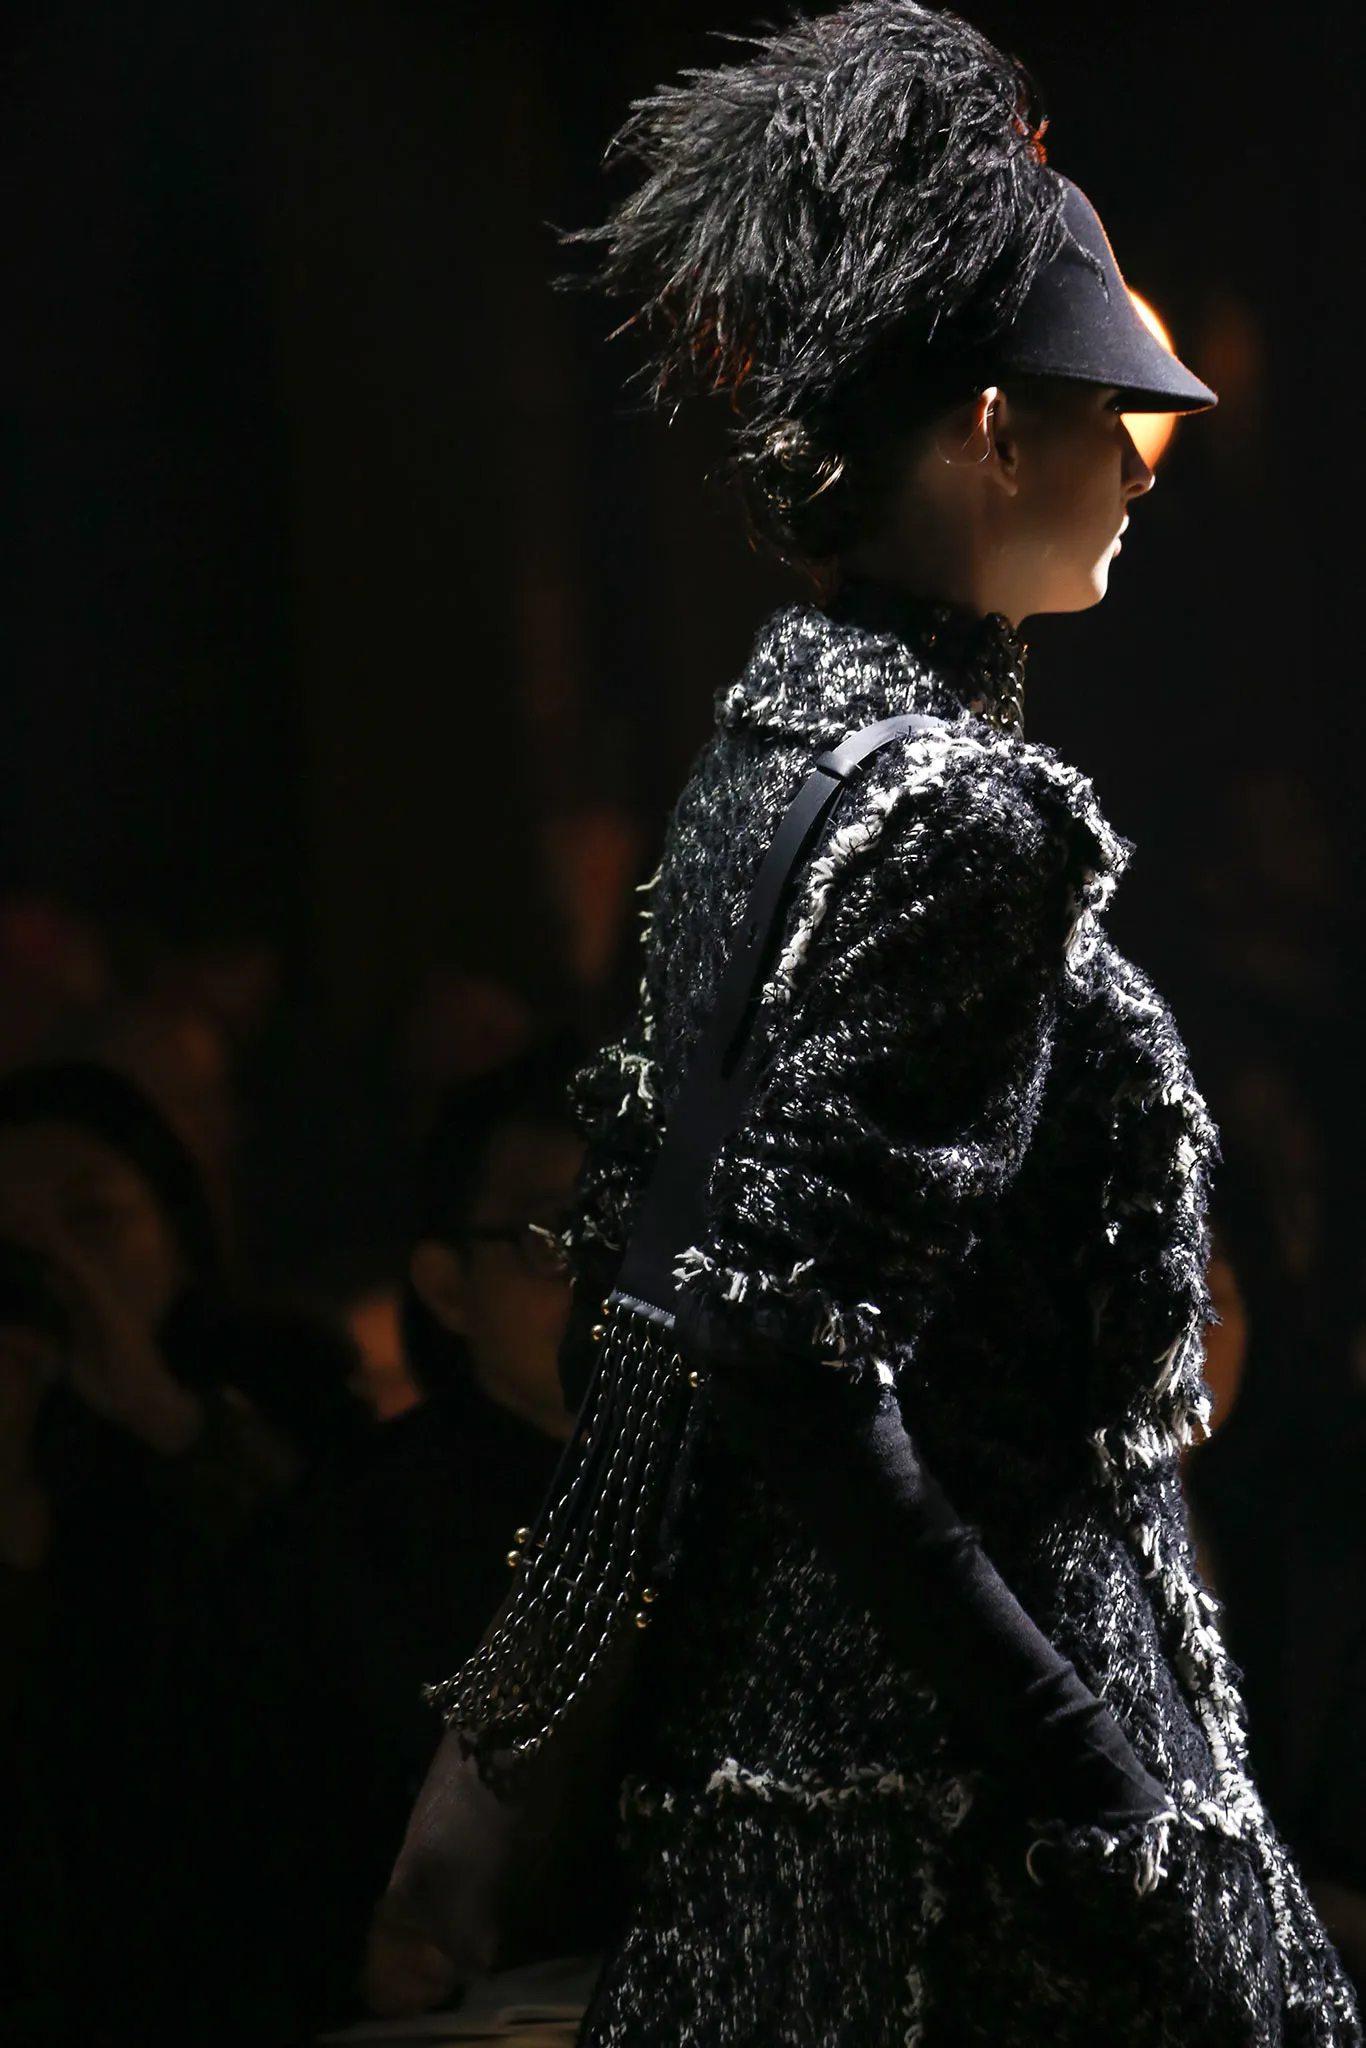 A LANVIN RABBIT FELT RIDING HAT WITH OSTRICH FEATHERS - Image 4 of 4